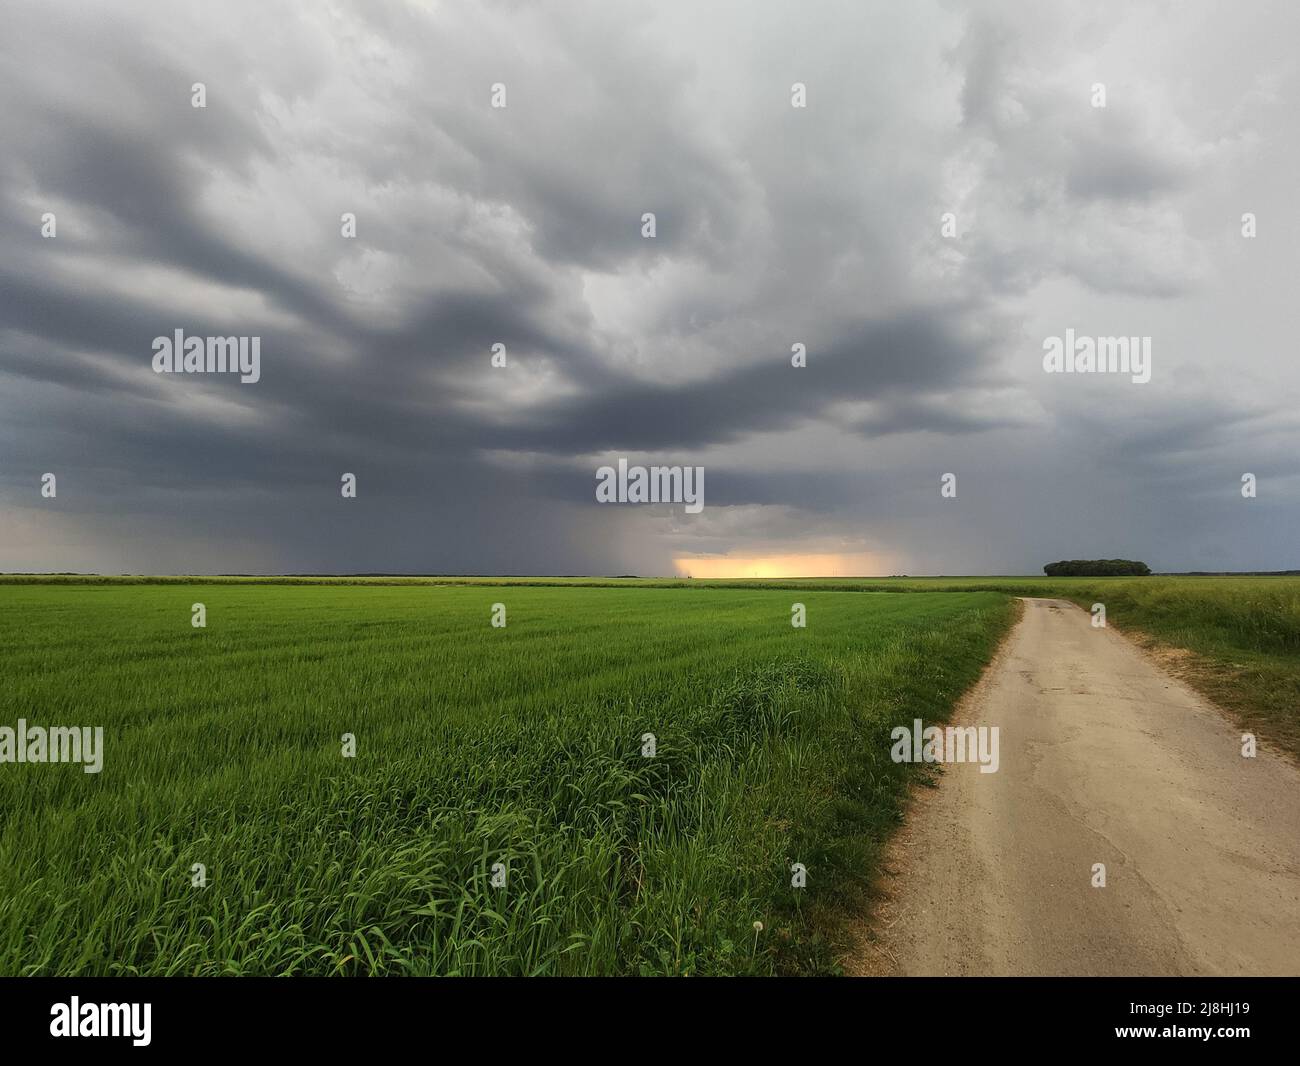 A beautiful storm cell on the horizon, with rain falling on a wheat farm during the spring. Stock Photo